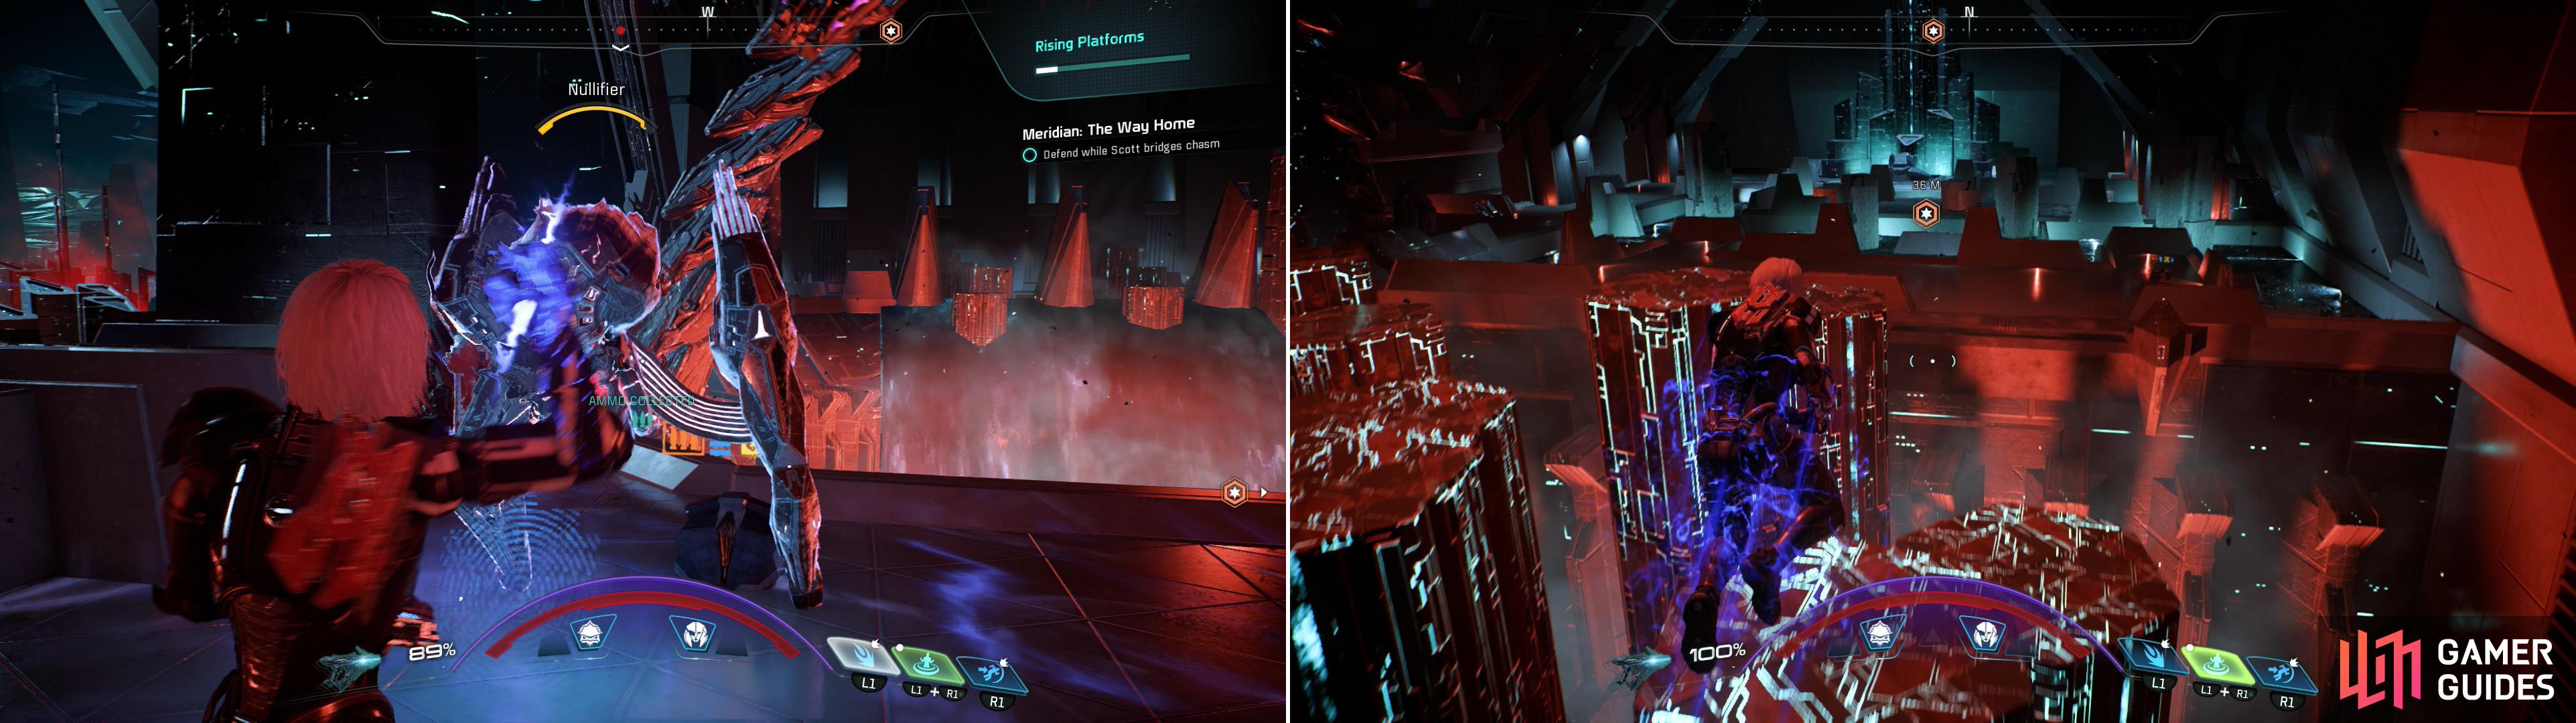 Destroy more Remnant while waiting for some platforms to deplay (left) then use the platforms to reach the next Power Relay (right).